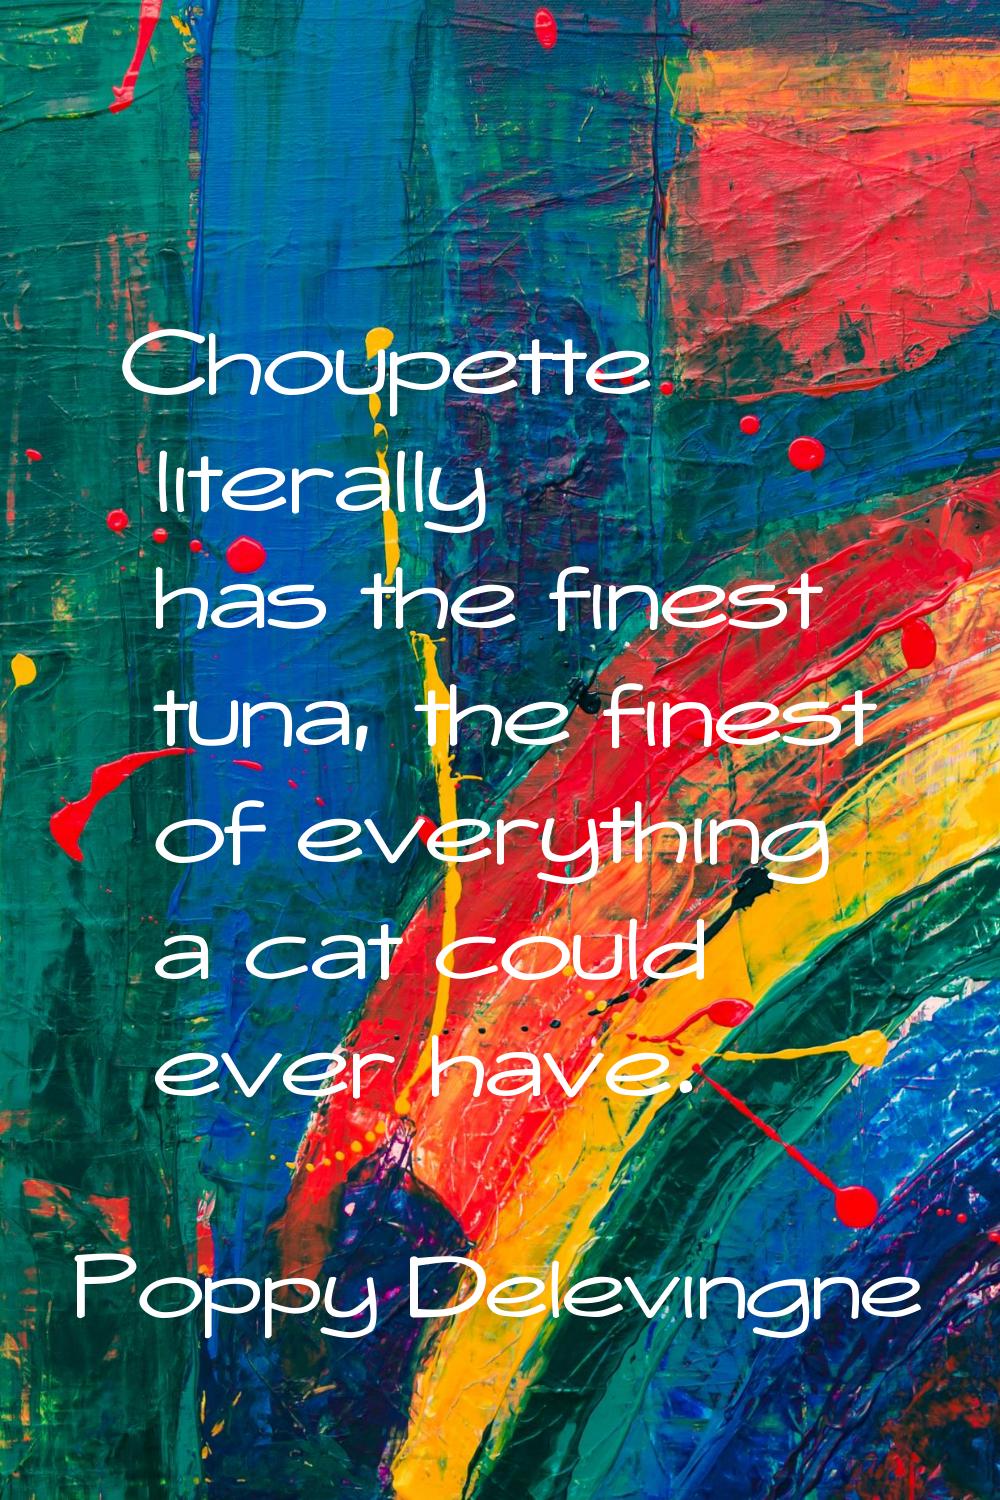 Choupette literally has the finest tuna, the finest of everything a cat could ever have.